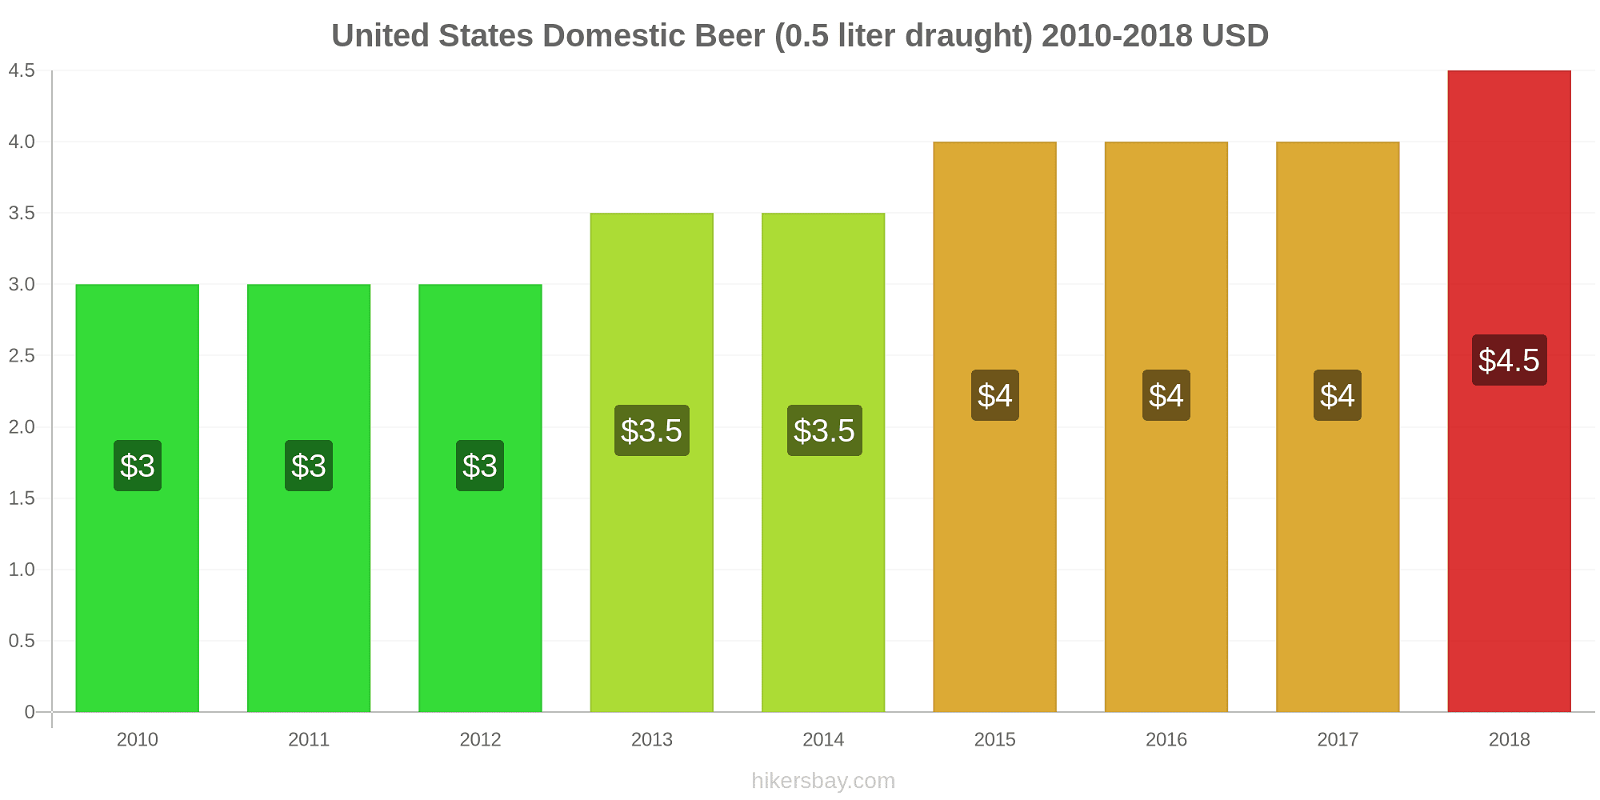 United States price changes Domestic Beer (0.5 liter draught) hikersbay.com